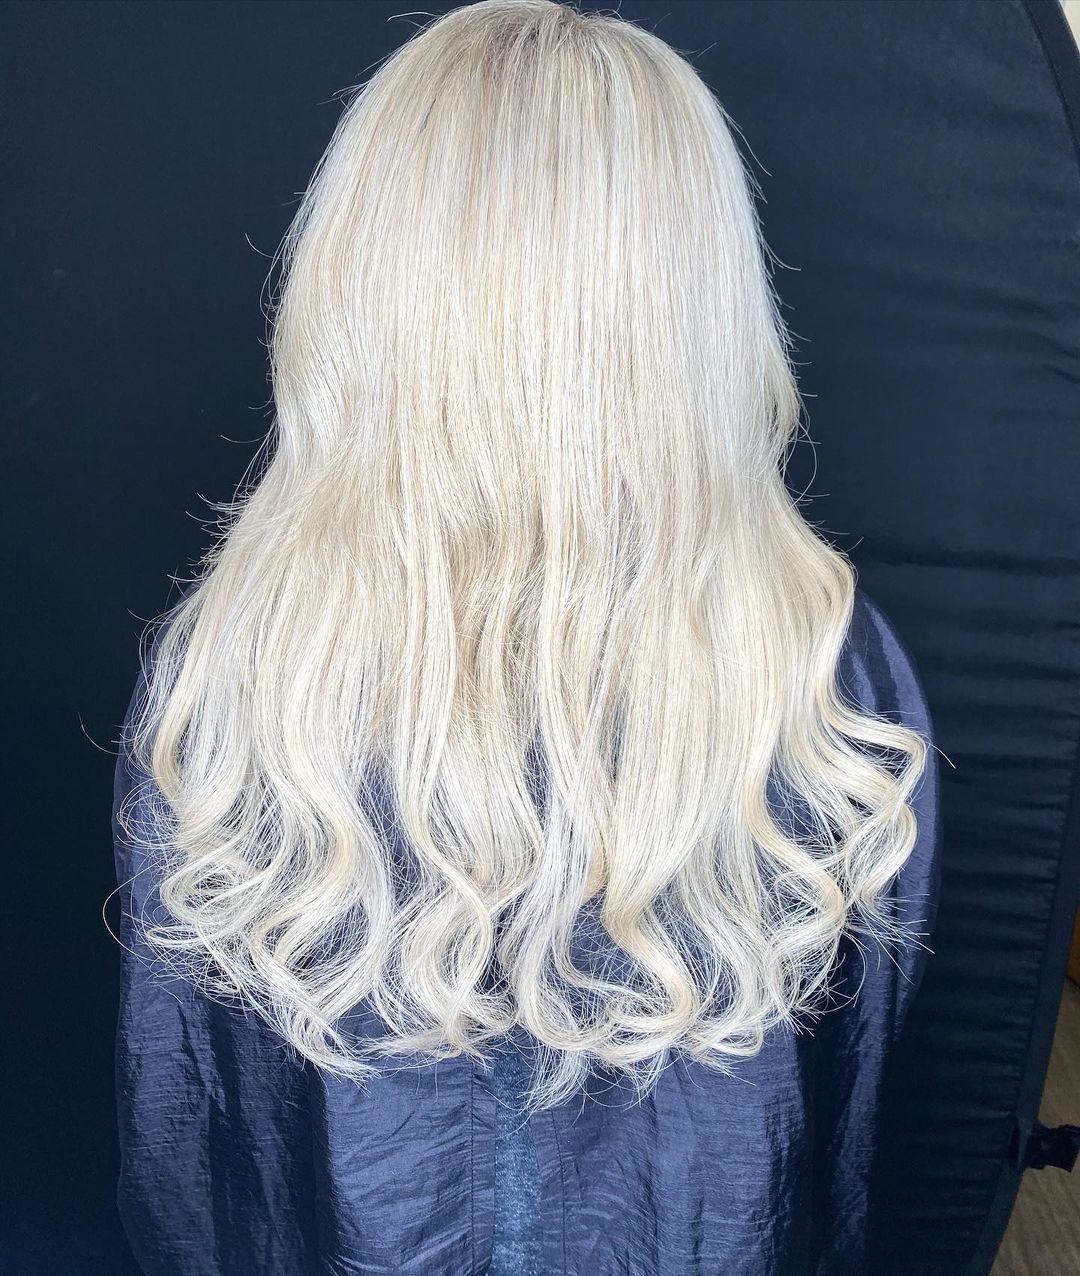 Yummy White buttery blonde hair color